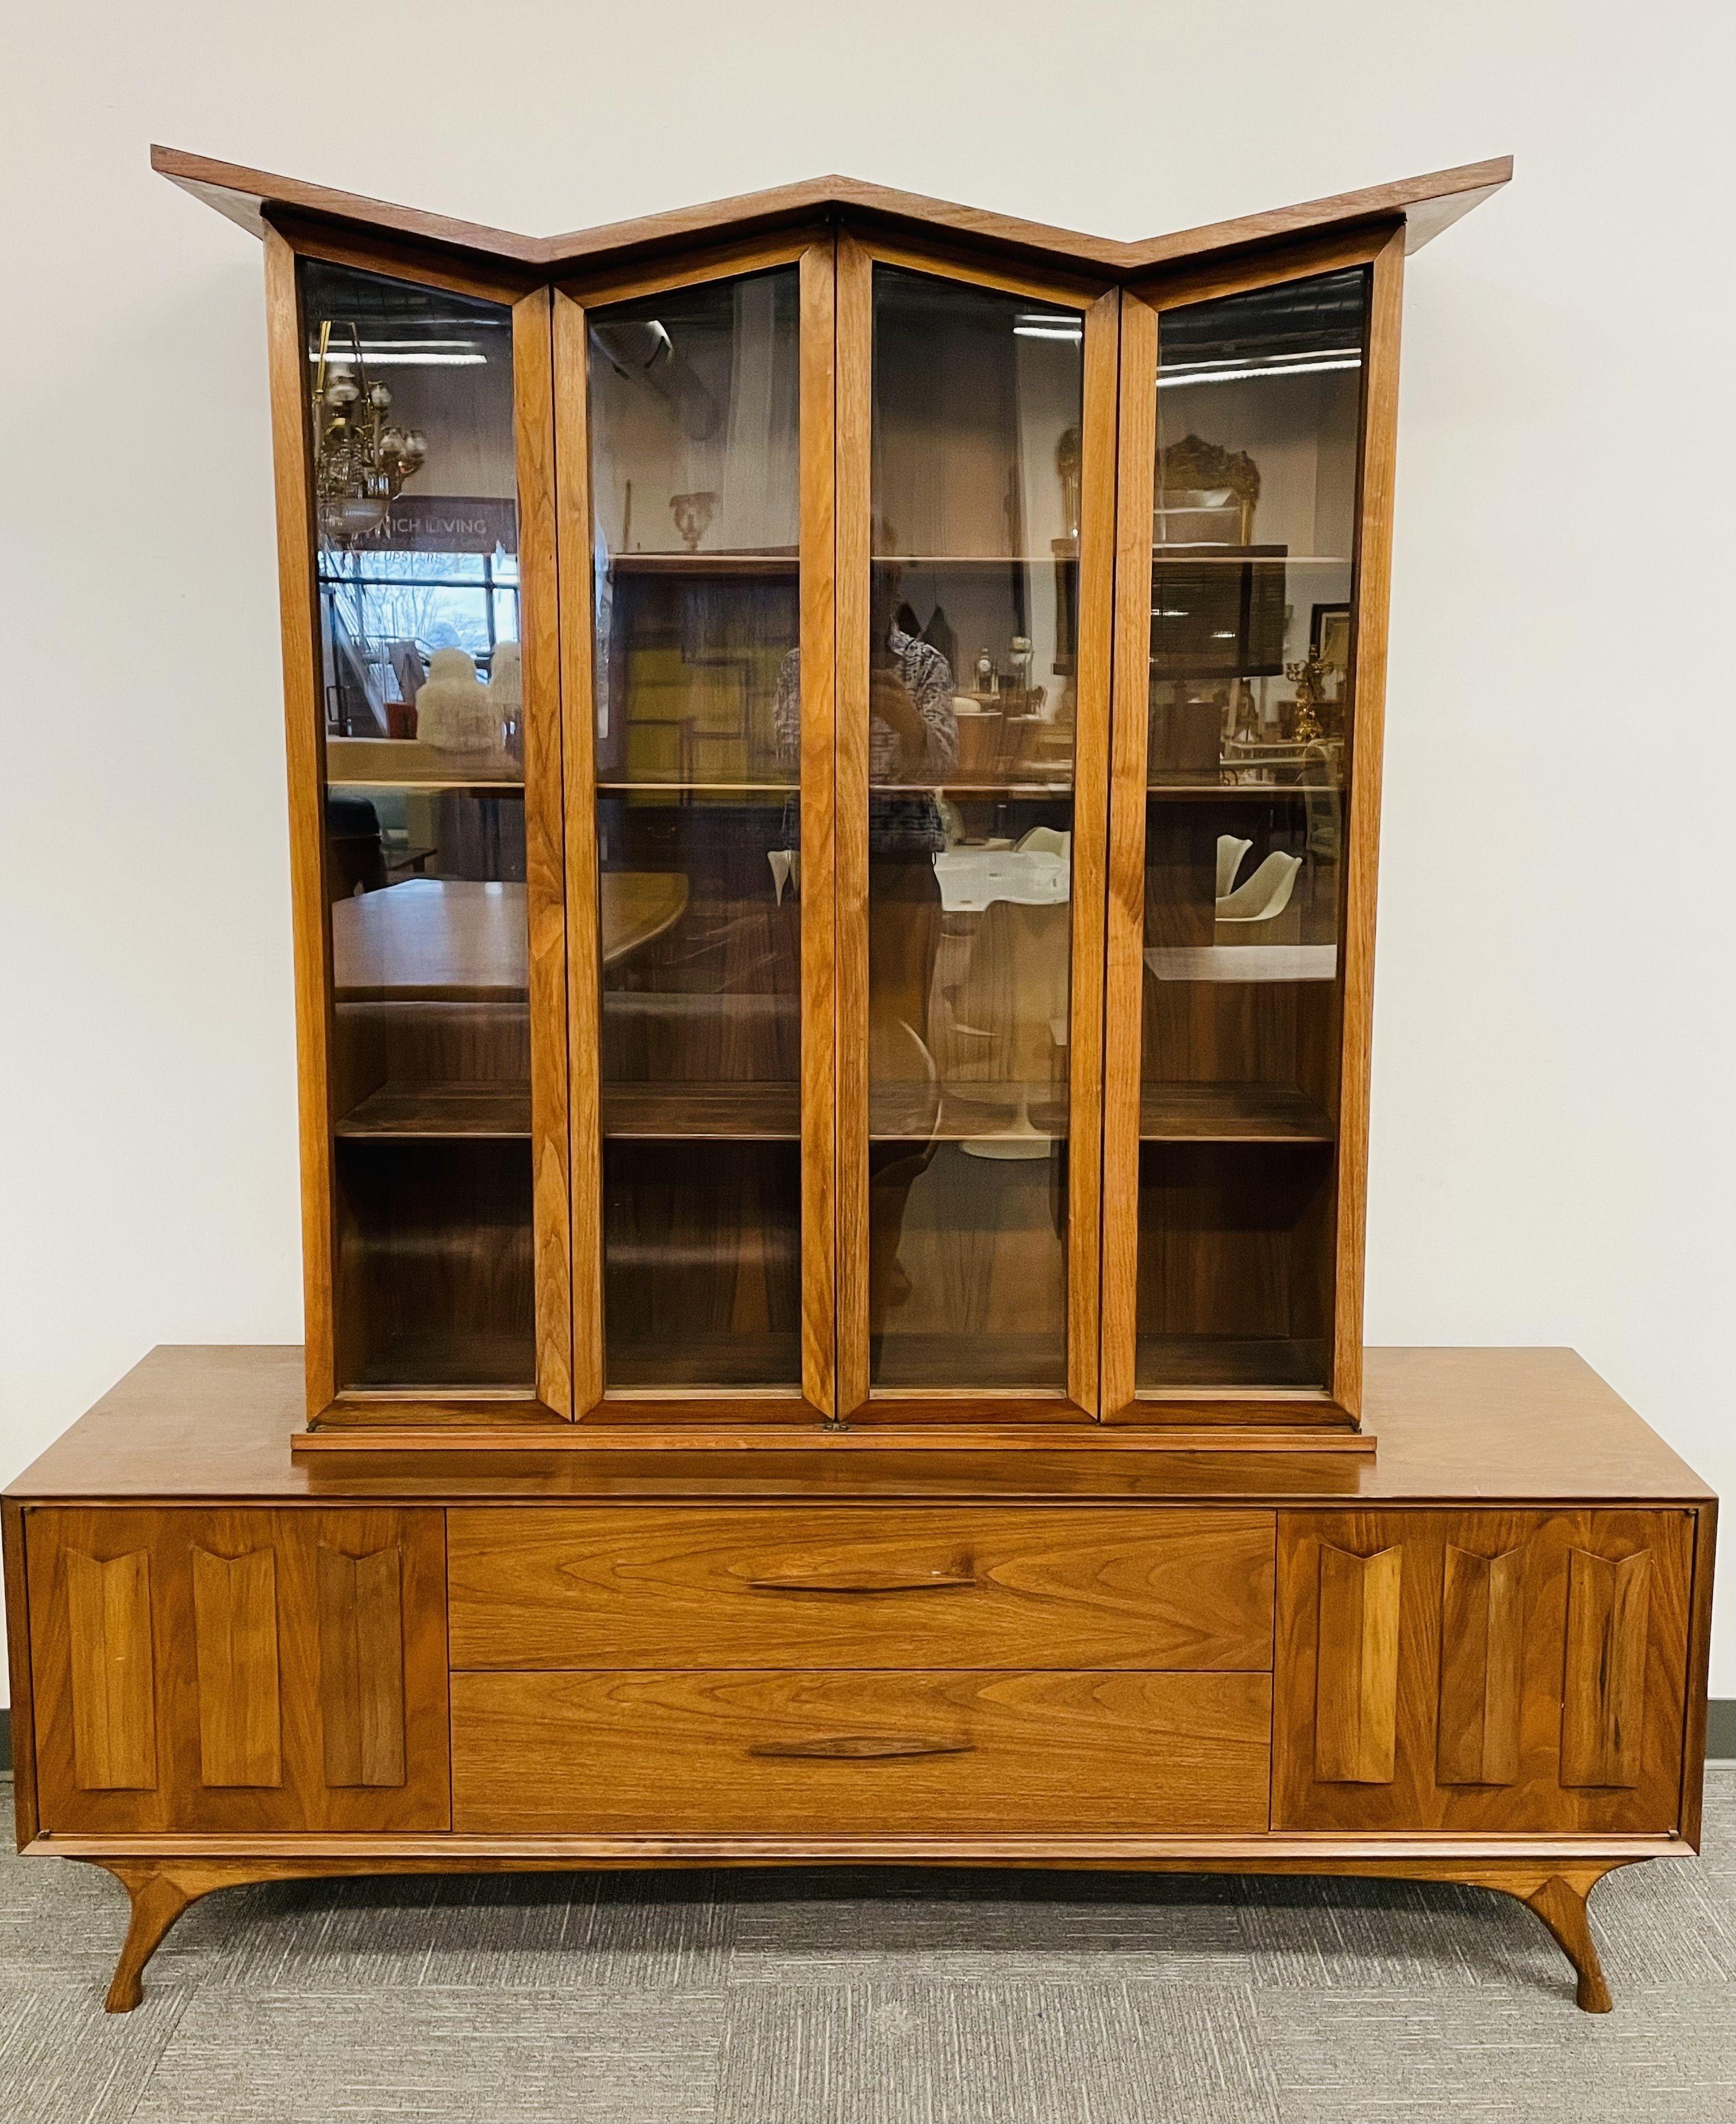 A Fine Mid-Century Modern breakfront of showcase cabinet having four glass doors with six adjustable shelves. This two piece stunning China or Display Cabinet bears the Irish Handcut label sitting on a sideboard base of geometric form having two